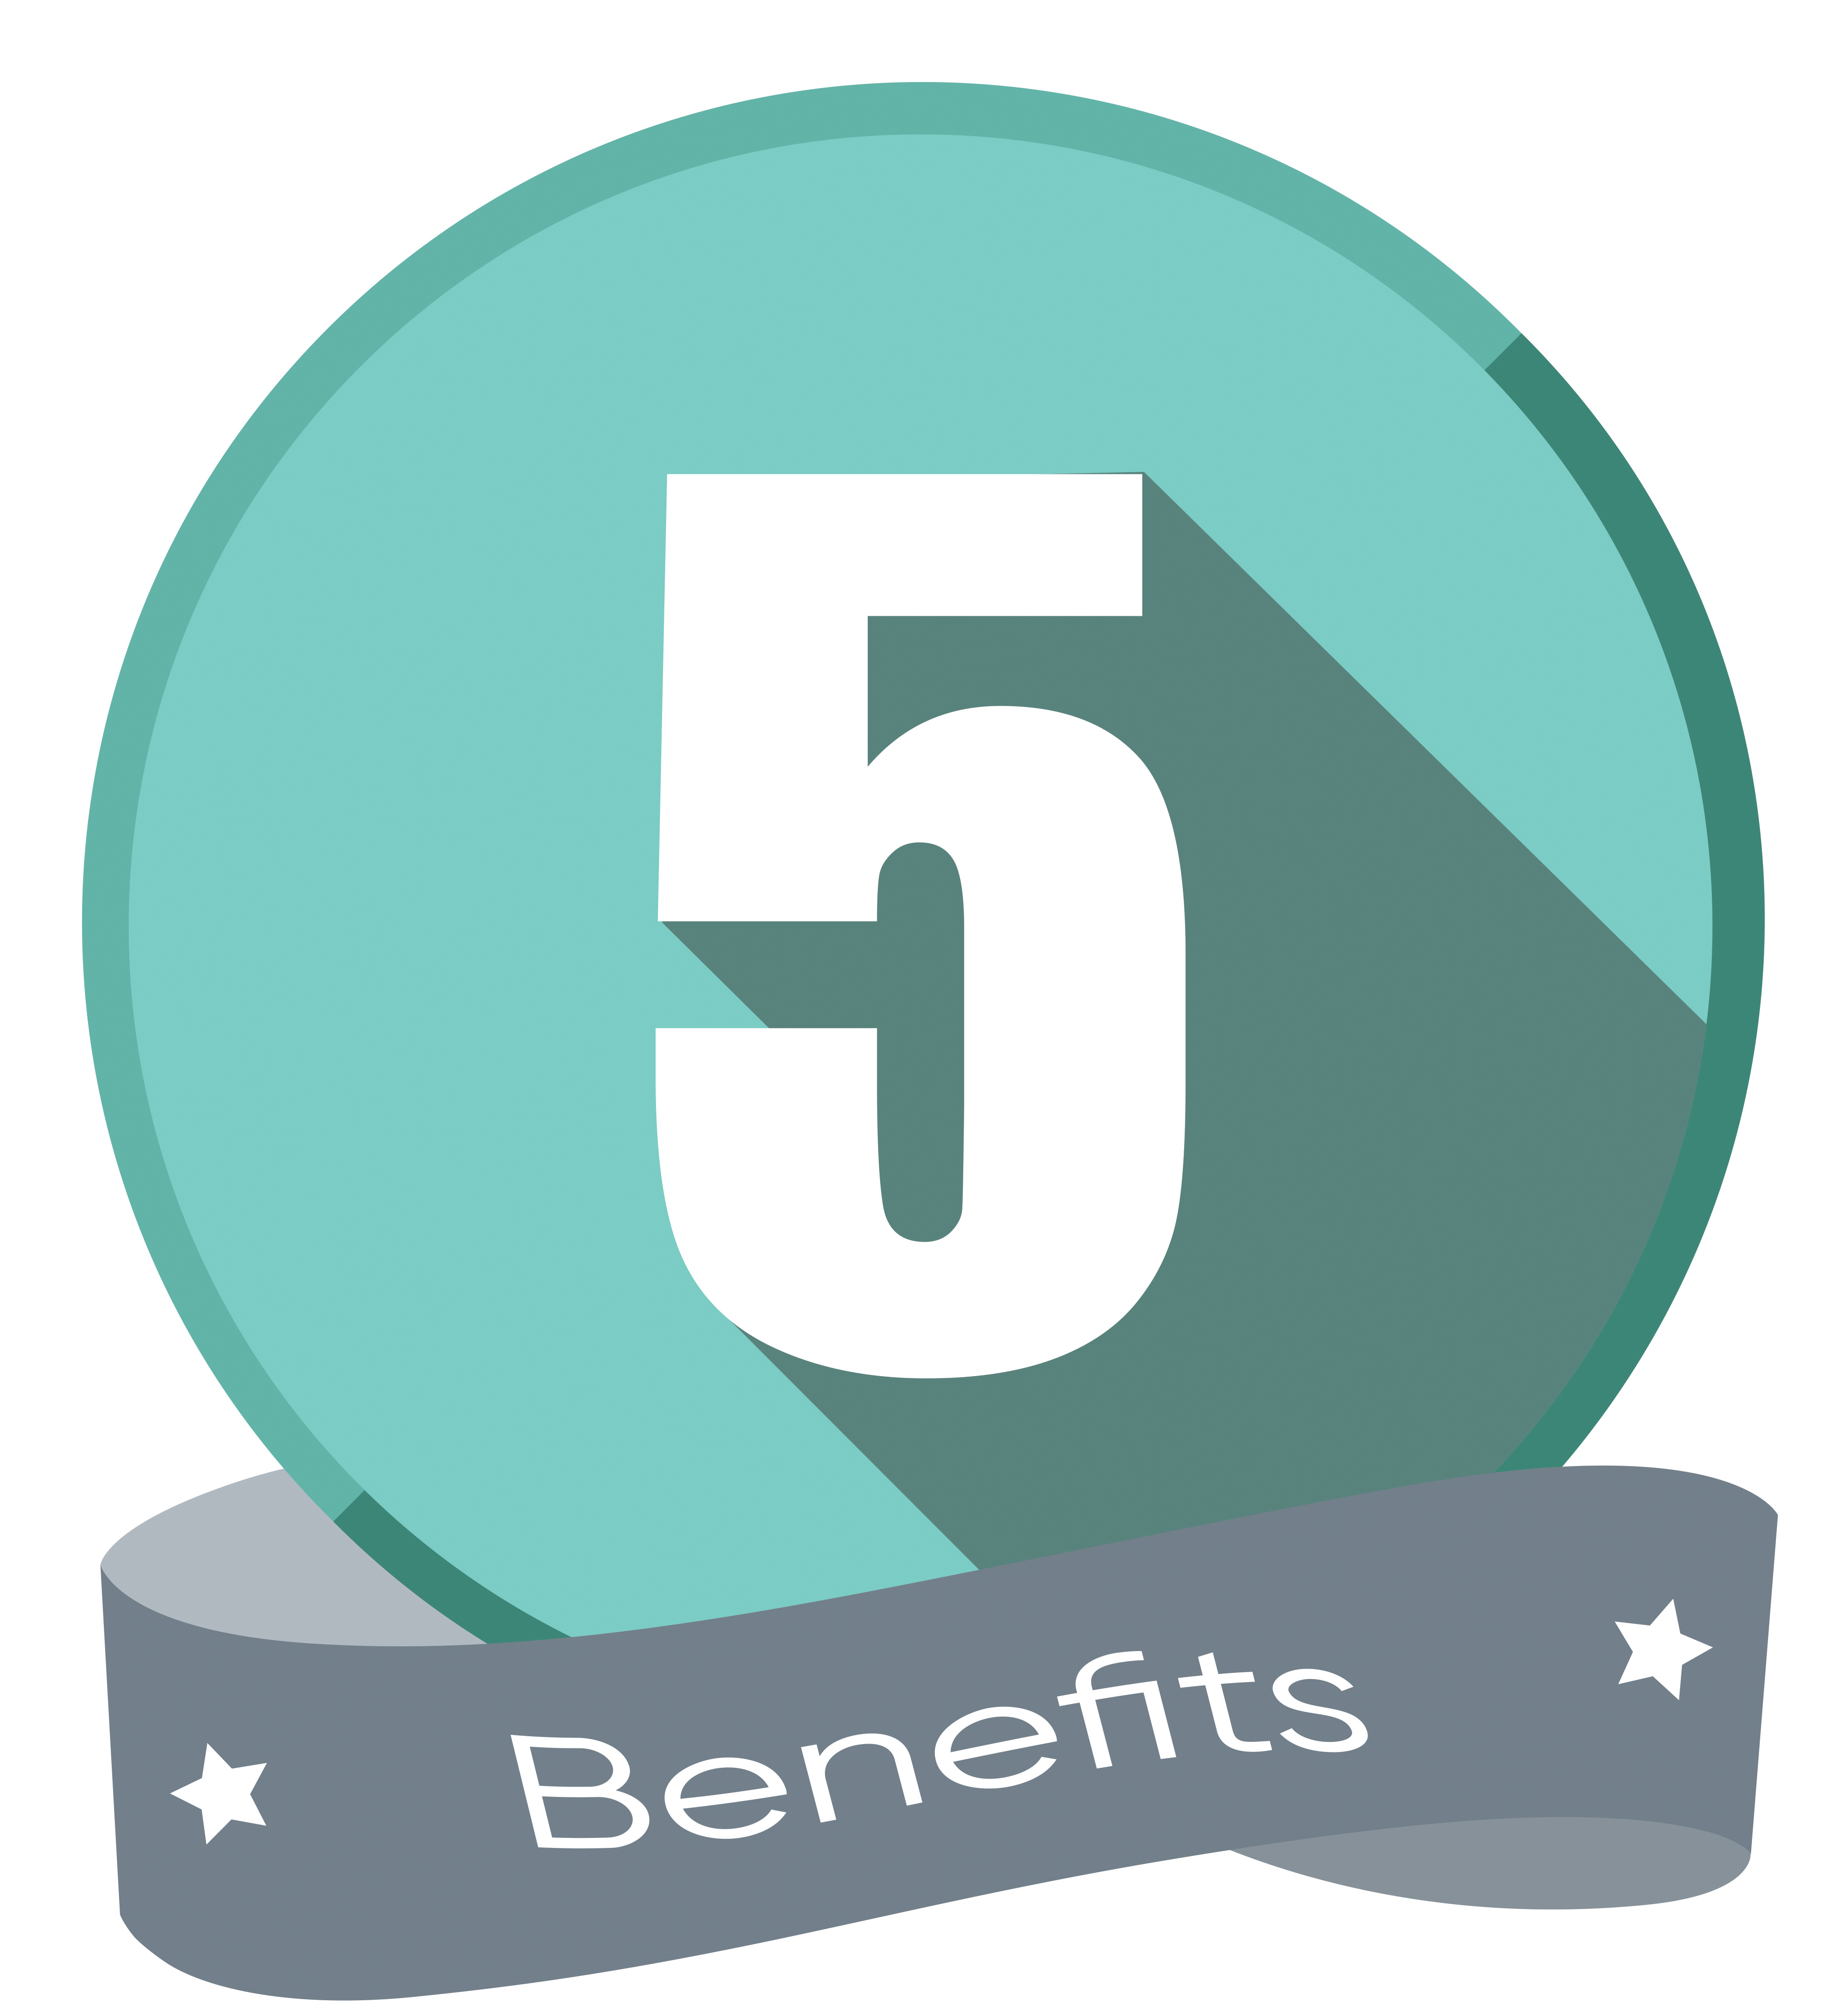 Top 5 benefits to using a single communications provider